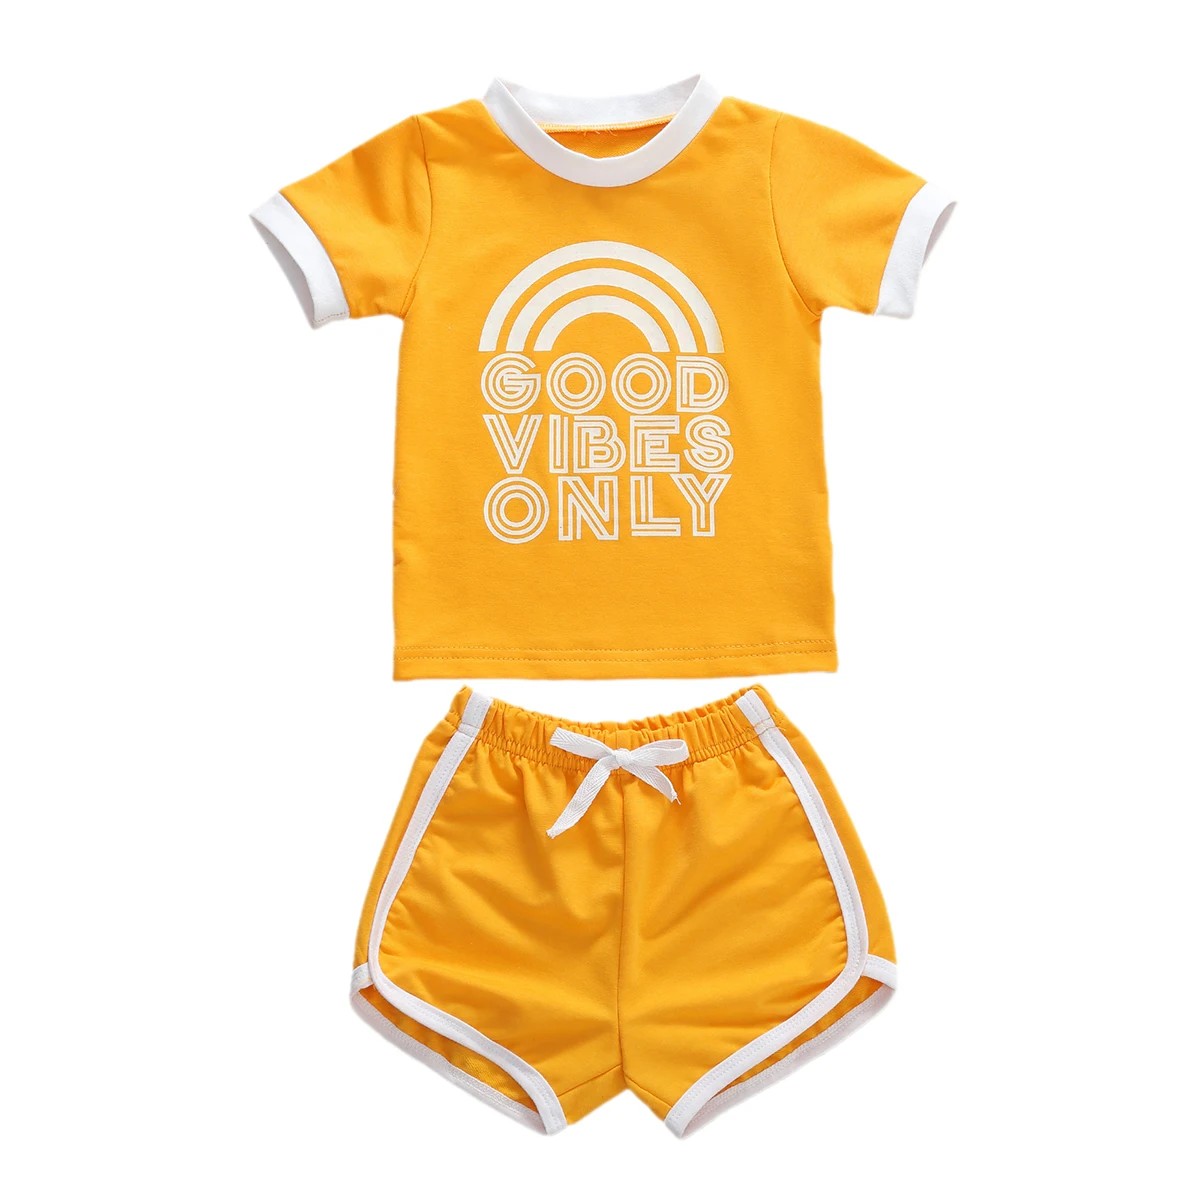 

Summer Infant Baby Girls 6M-4T Clothes Sets Causal Letter Print Short Sleeve T Shirts Tops+Shorts Yellow 2pcs